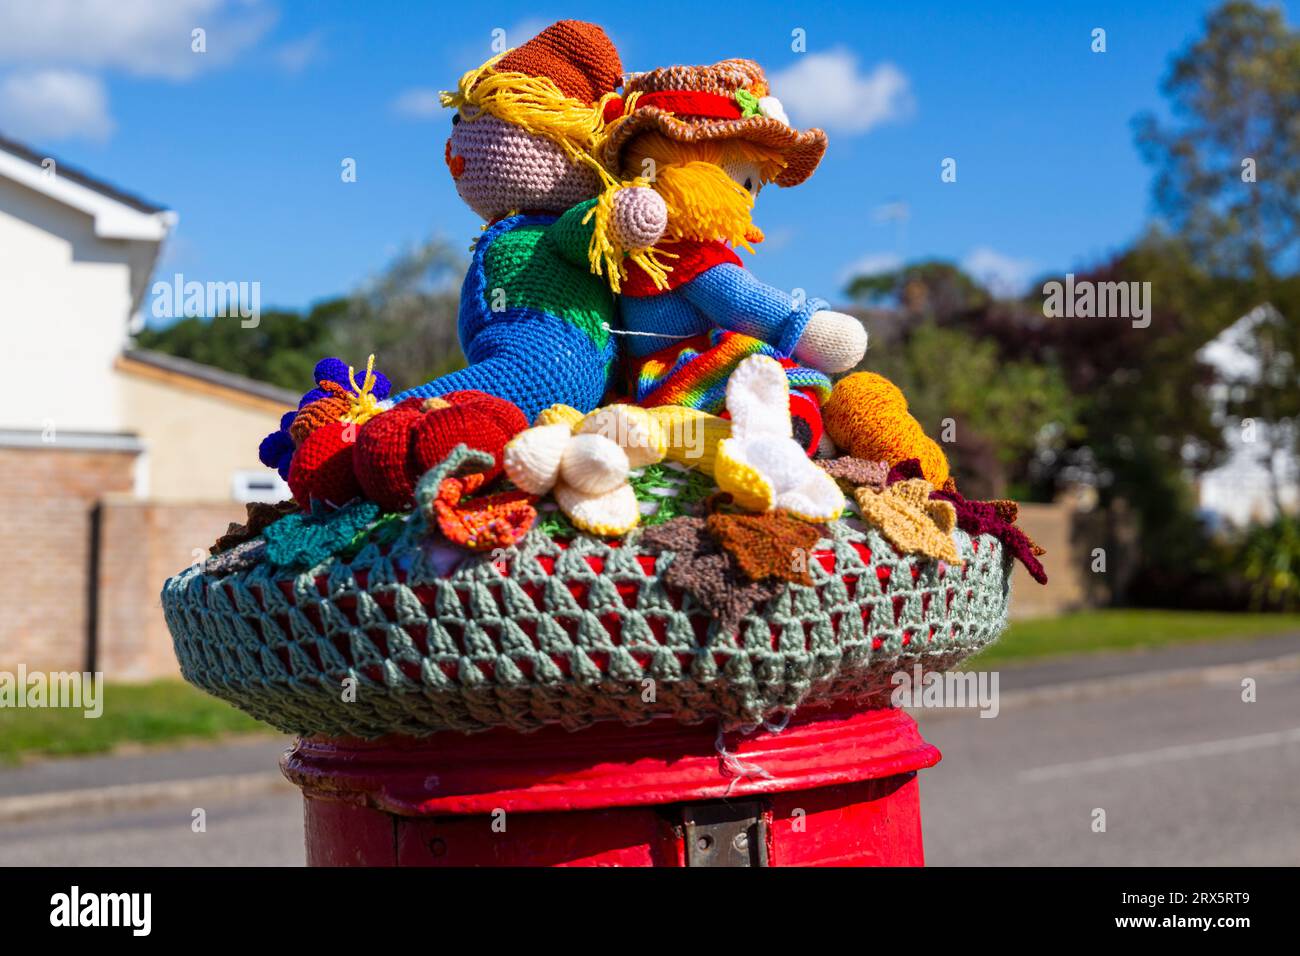 Poole, Dorset, UK. 23rd September 2023. UK Weather: Sunshine as a knitted crocheted postbox topper appears on a red post box in Poole, Dorset with a Harvest Festival theme, a celebration of the harvest and food grown, to celebrate when crops have been gathered and people can reflect and show gratitude for the food they have. Credit: Carolyn Jenkins/Alamy Live News Stock Photo